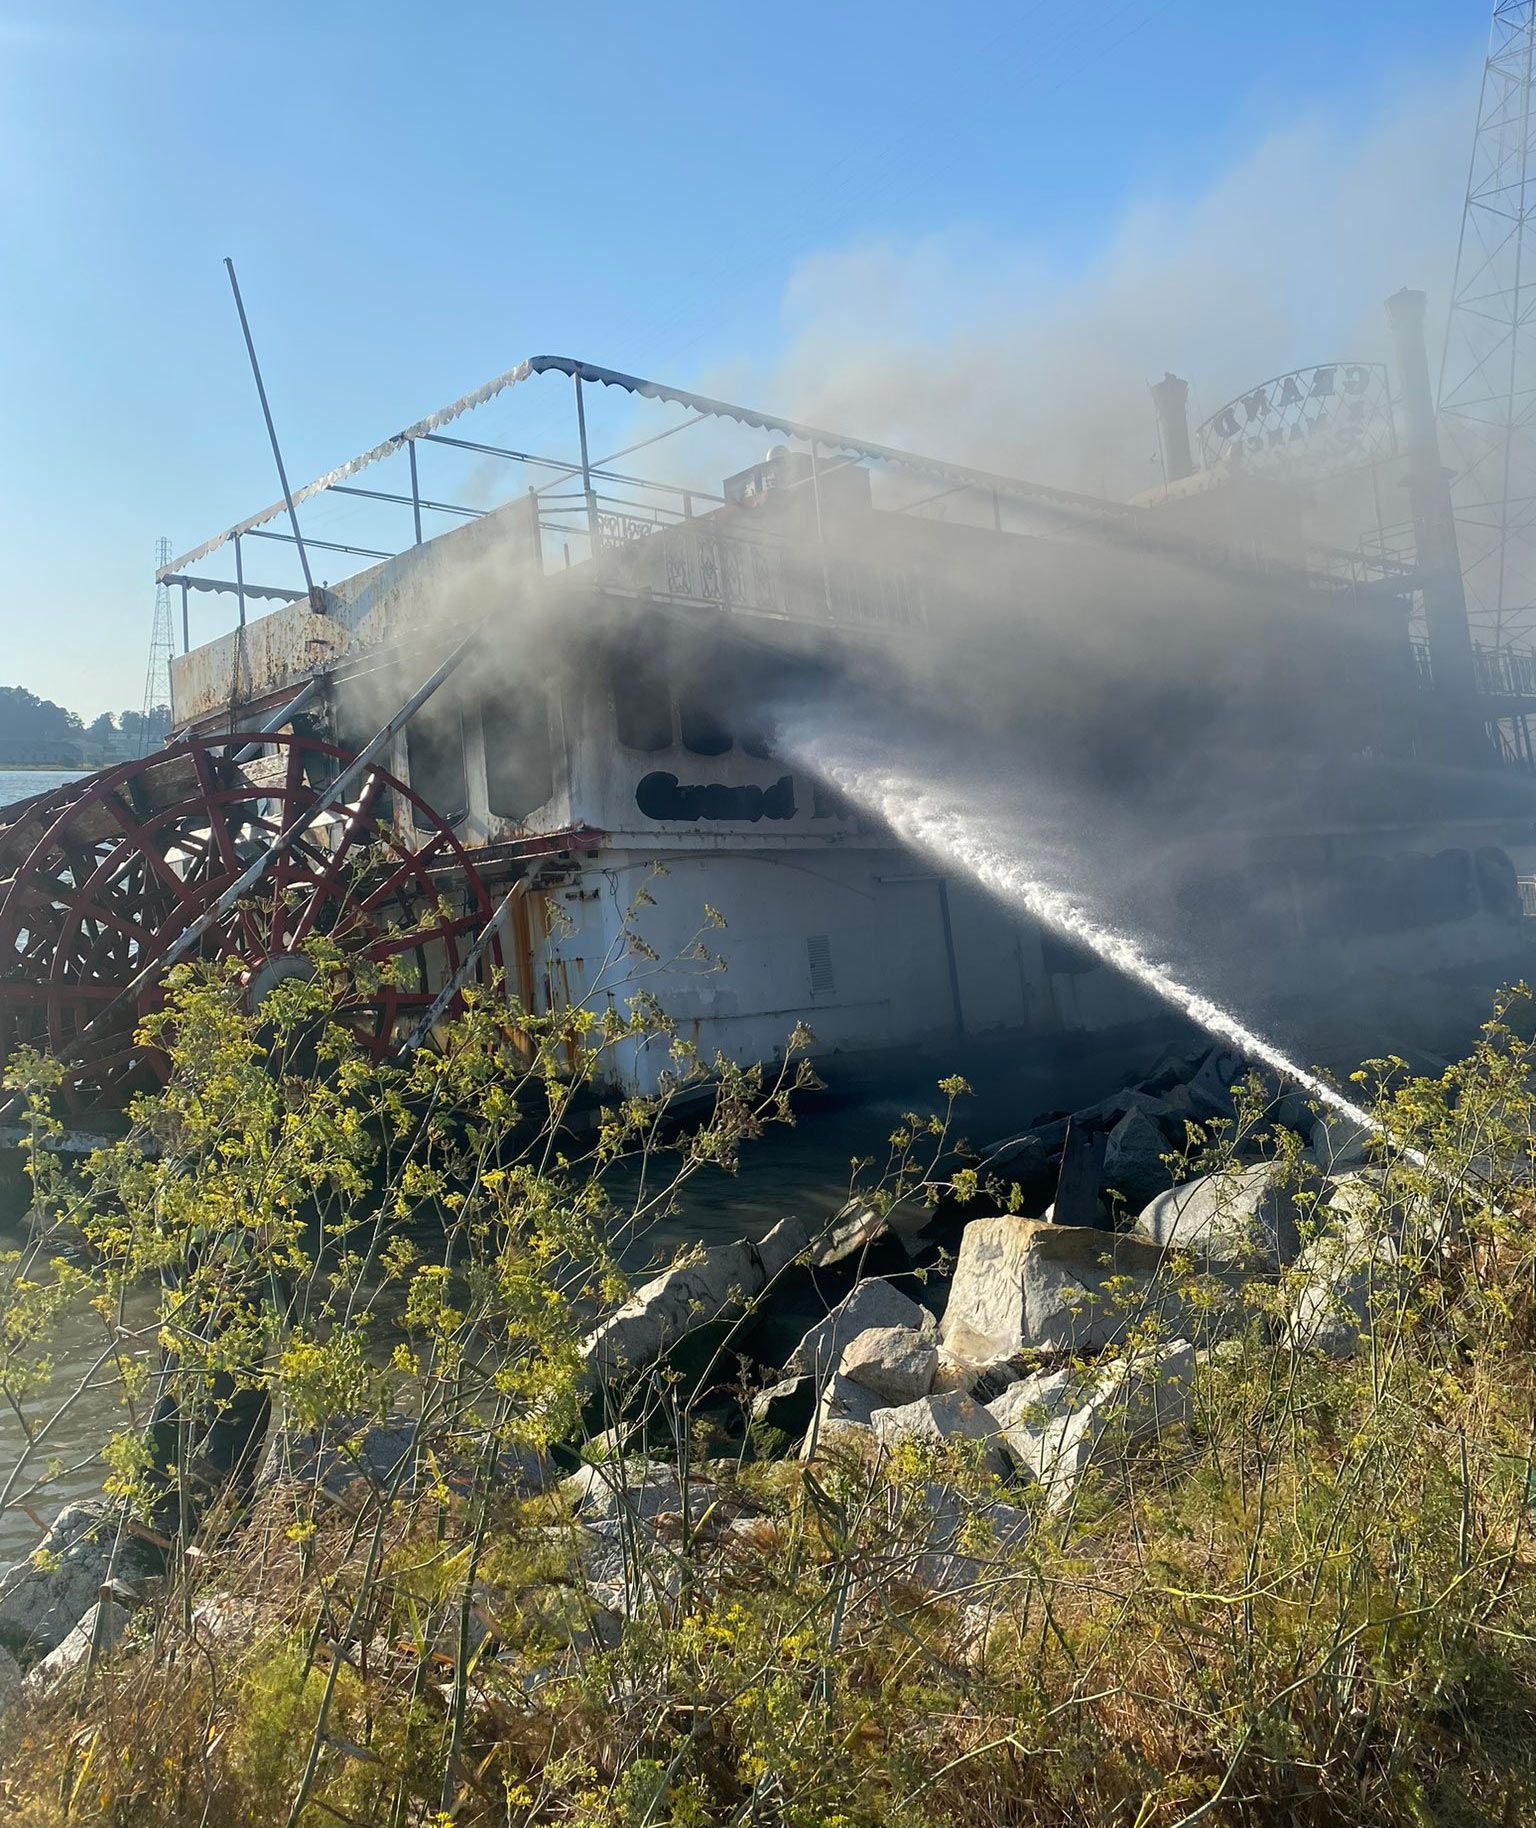 Firefighters extinguish the blaze on the Grand Romance riverboat on Saturday.